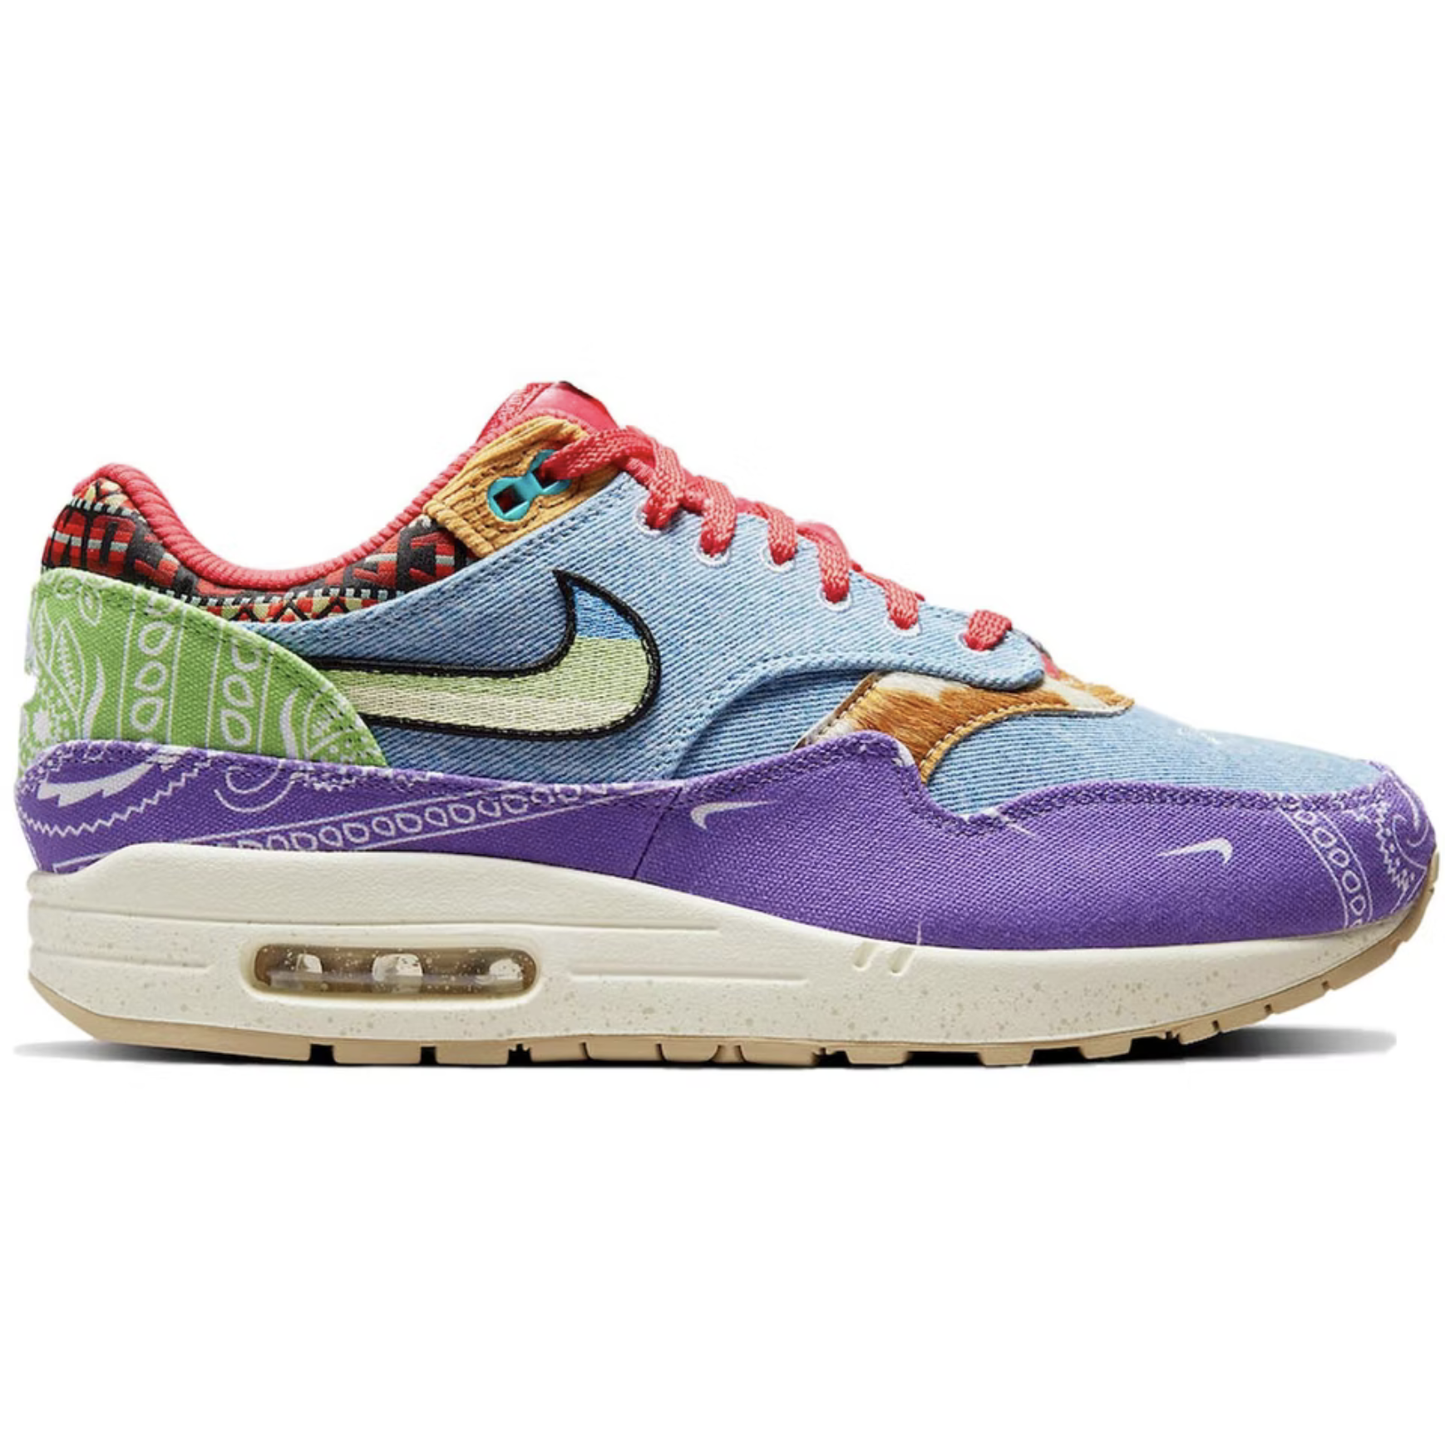 Nike Air Max 1 SP Concepts Far Out (Special Box) from Nike